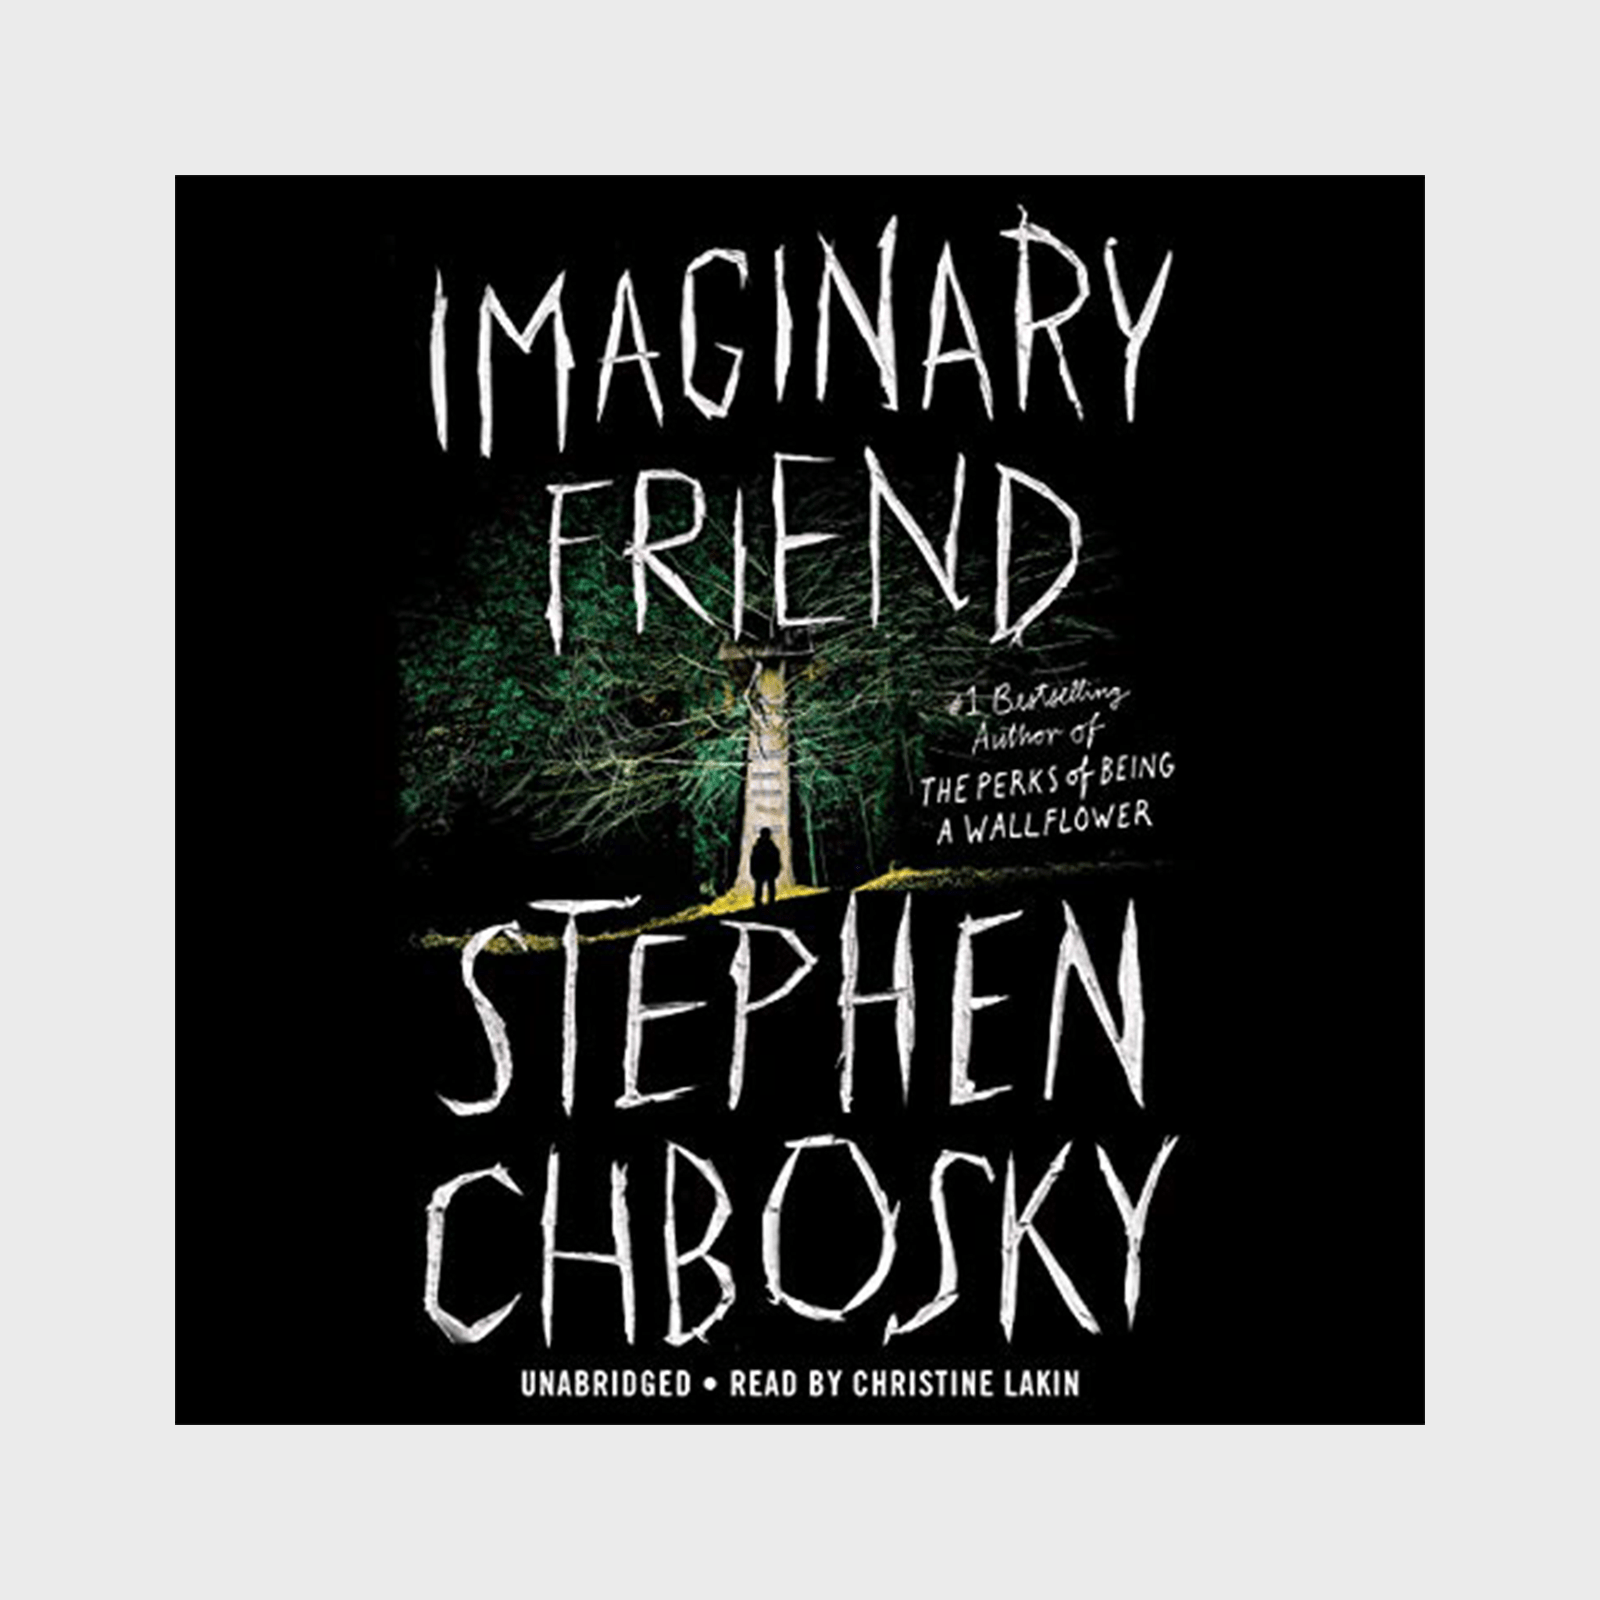 <h3><strong><em>Imaginary Friend </em>by Stephen Chbosky</strong></h3> <p>A screenwriter and director in addition to author, Chbosky is best known for his beloved novel <em>The Perks of Being a Wallflower</em>. In 2019, 20 years after that book's release and infinite success, Chbosky penned one of the creepiest <a href="https://www.rd.com/list/scariest-books/" rel="noopener noreferrer">horror books</a> in recent memory, about a seven-year-old boy who is sent on a terrifying mission by a "nice man" only he can hear. His encounters with the hissing lady, fanged deer, and an entire town gone mad make <a href="https://www.amazon.com/Imaginary-Friend-Stephen-Chbosky-audiobook/dp/B07WRDVDP9/" rel="noopener noreferrer"><em>Imaginary Friend</em></a> a book you definitely won't want to listen to when the lights go out.</p> <p class="listicle-page__cta-button-shop"><a class="shop-btn" href="https://www.amazon.com/Imaginary-Friend-Stephen-Chbosky-audiobook/dp/B07WRDVDP9/">Shop Now</a></p>